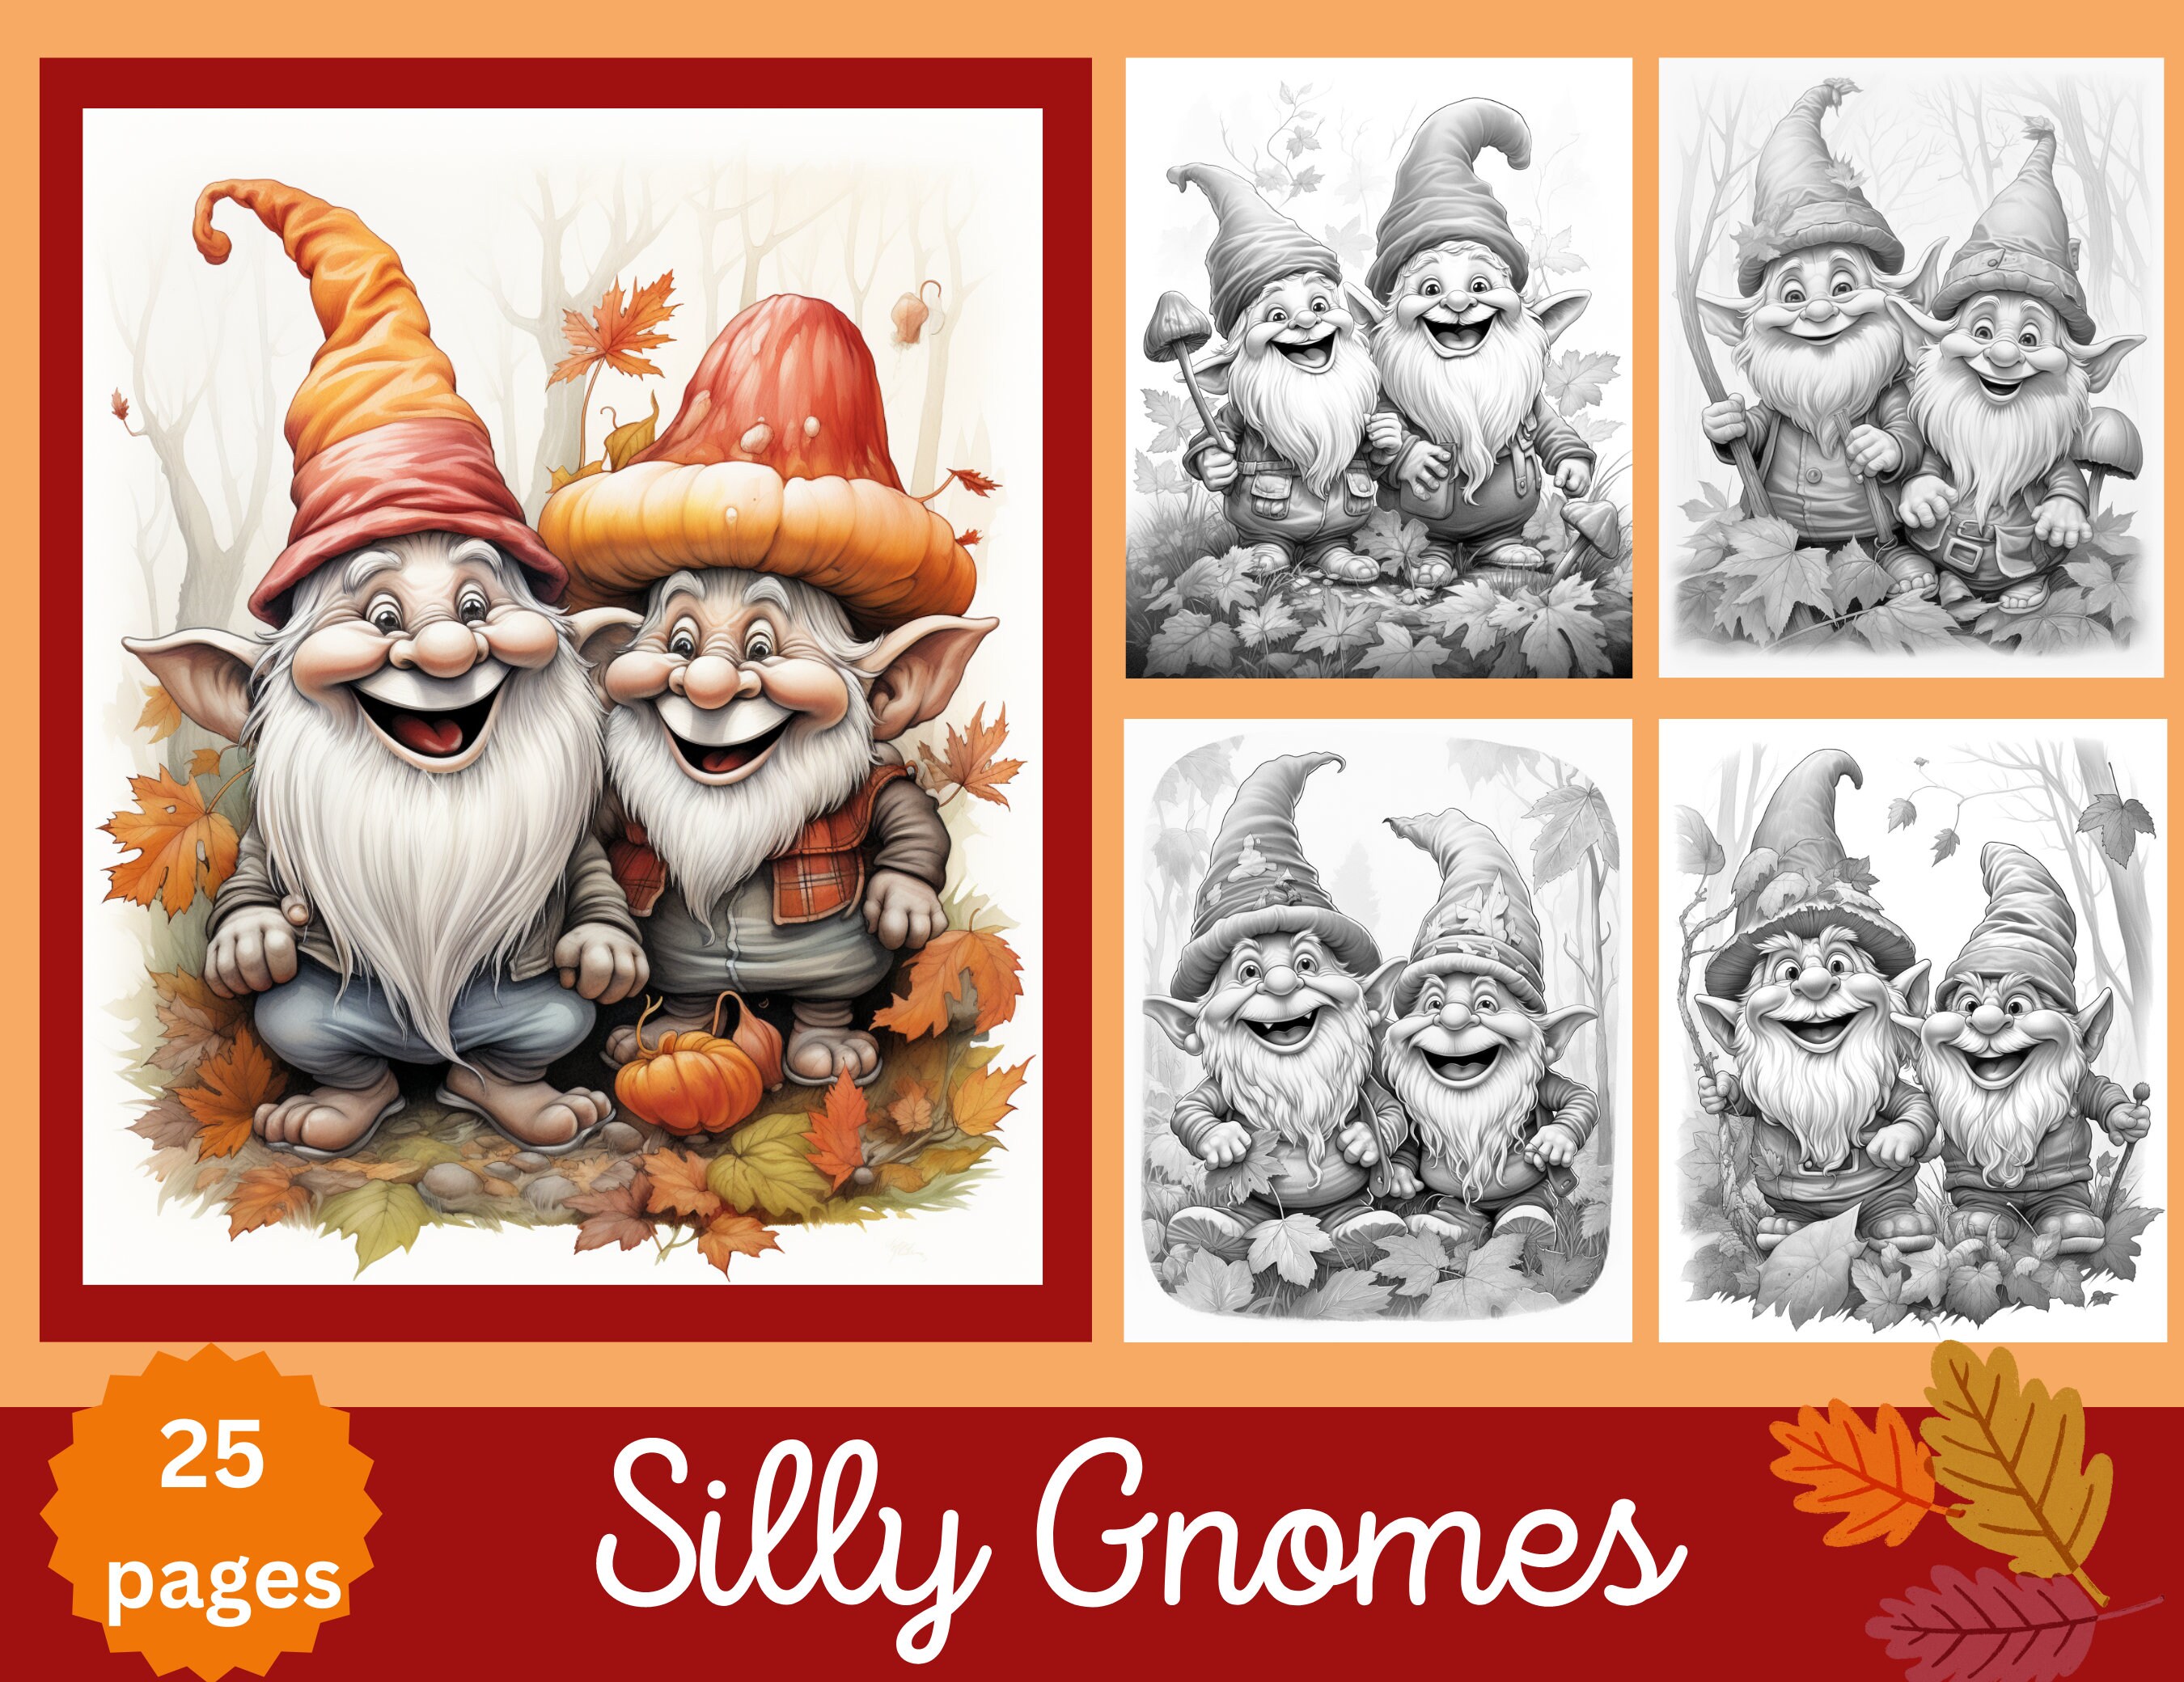 Silly Gnome 